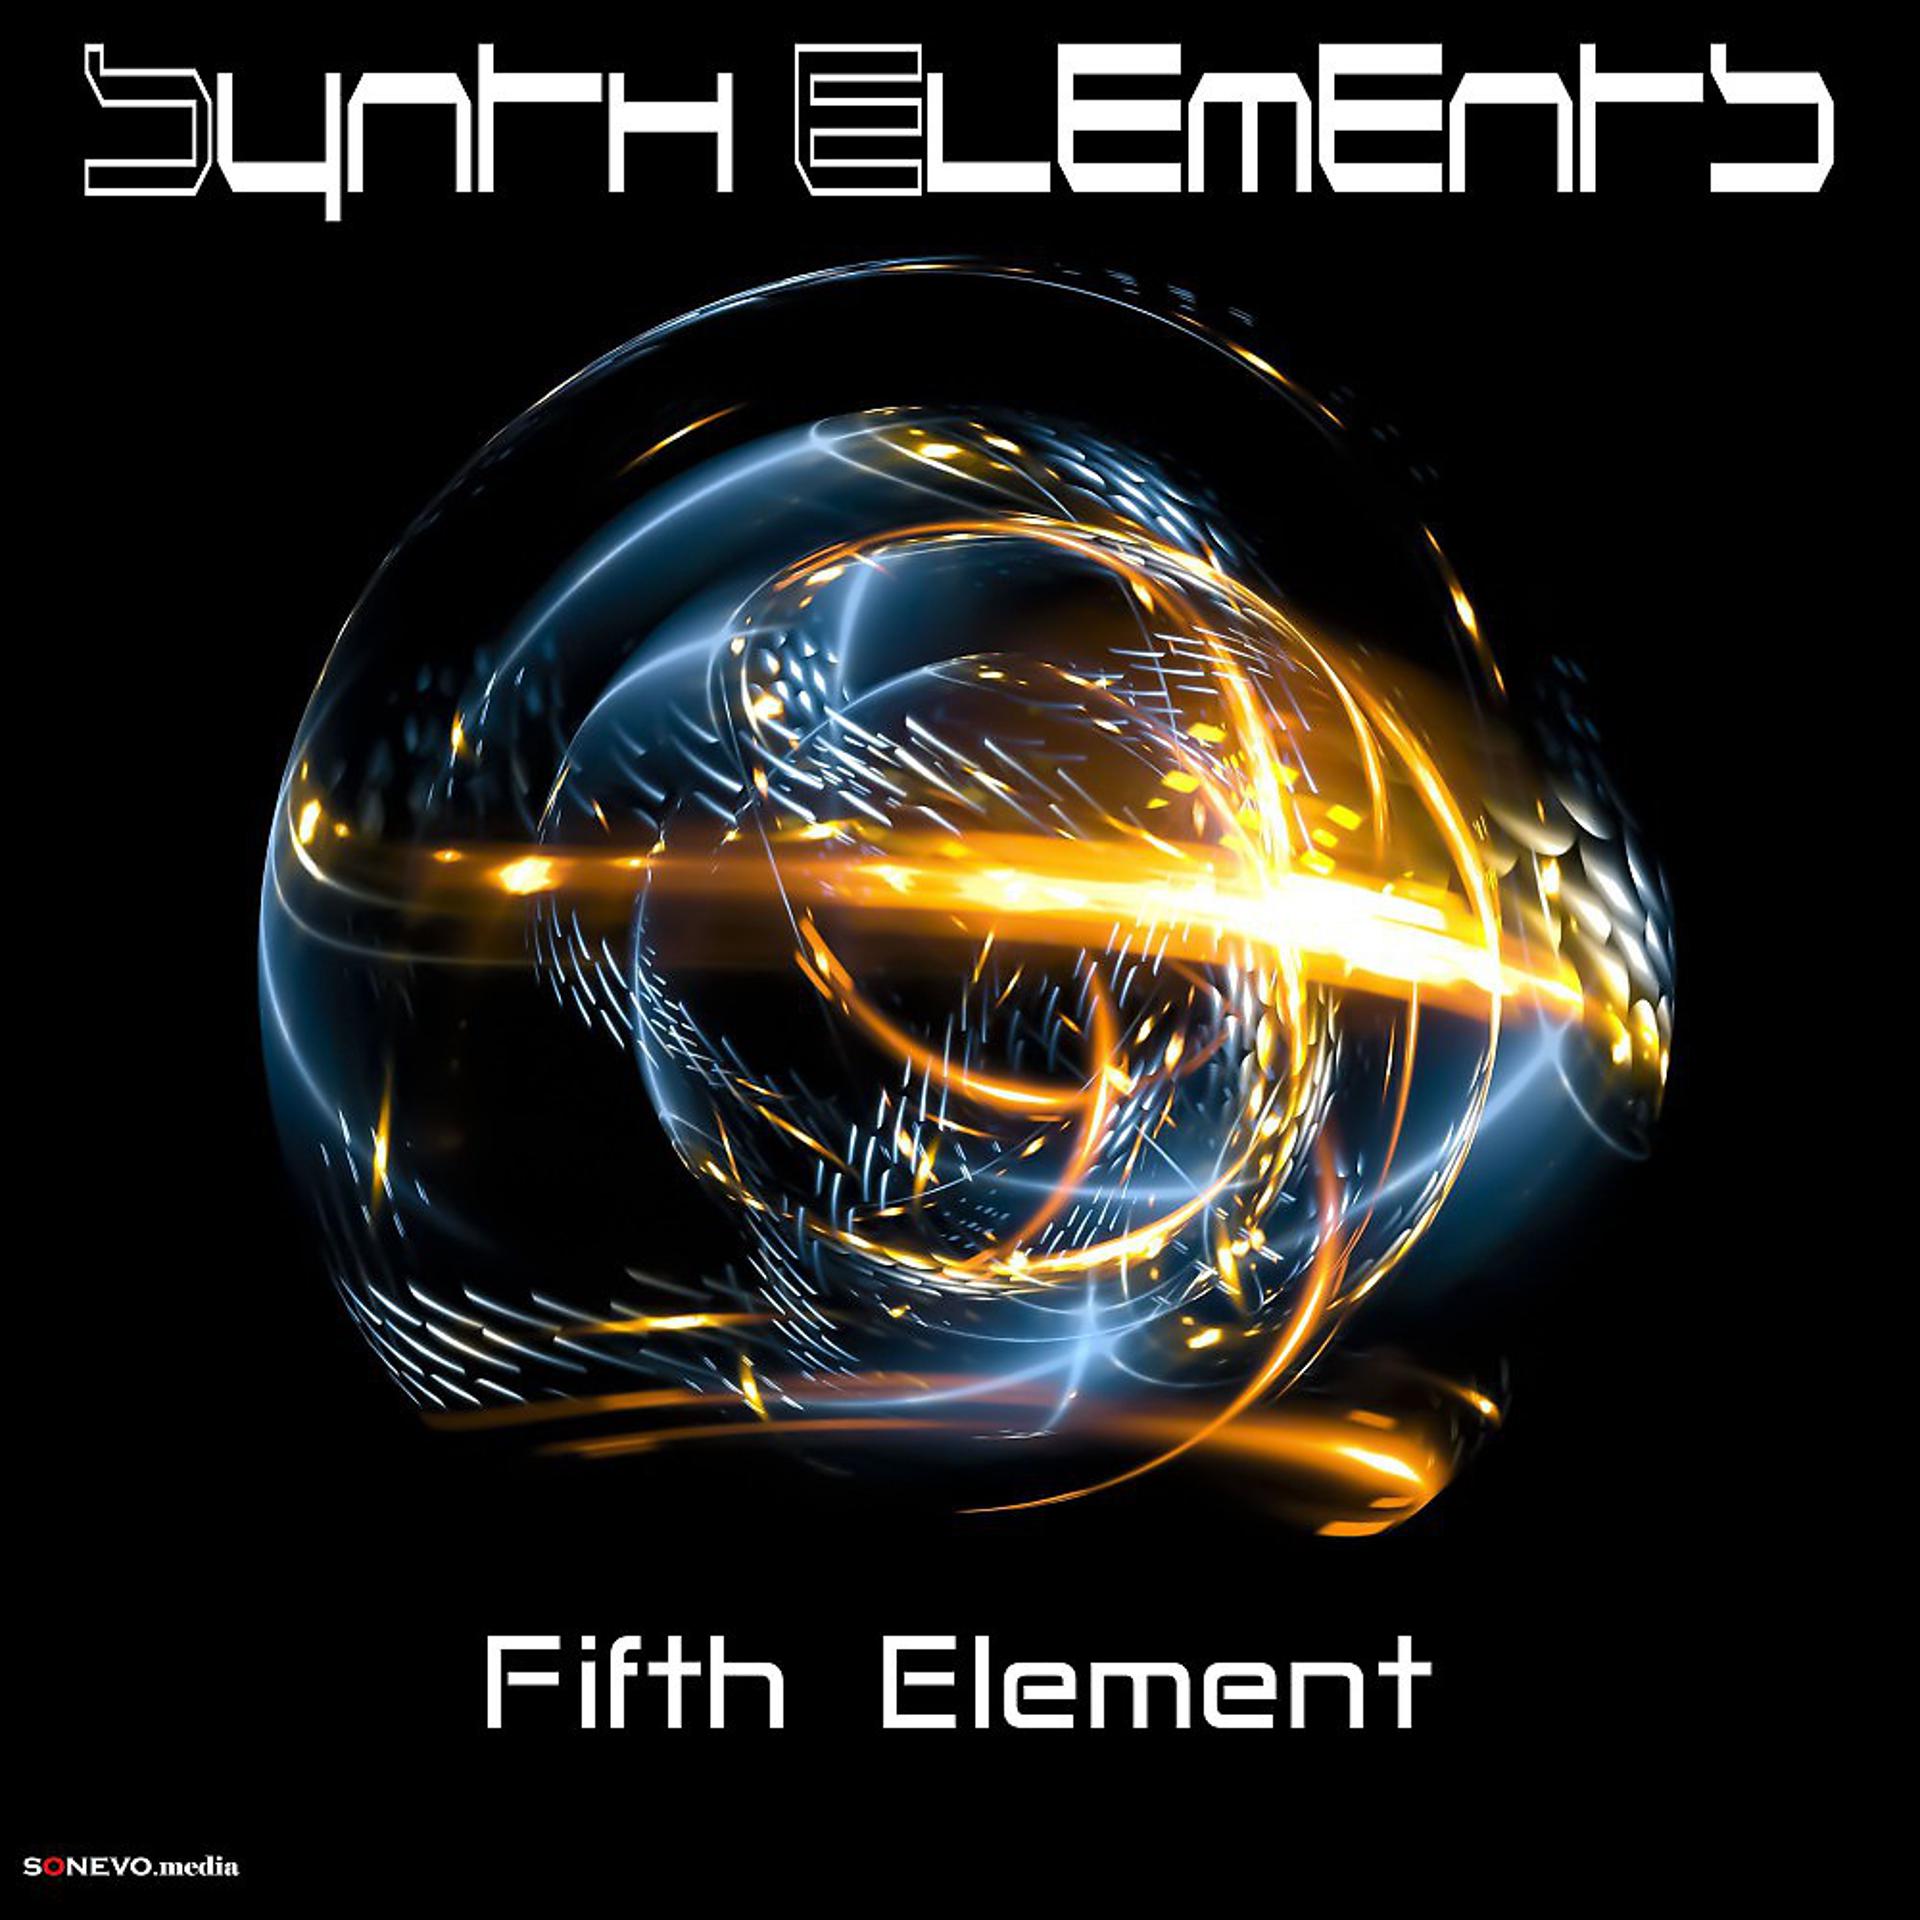 Elements слушать. Amazing element. Synth elements Energy of Space. Spacesynth vector.